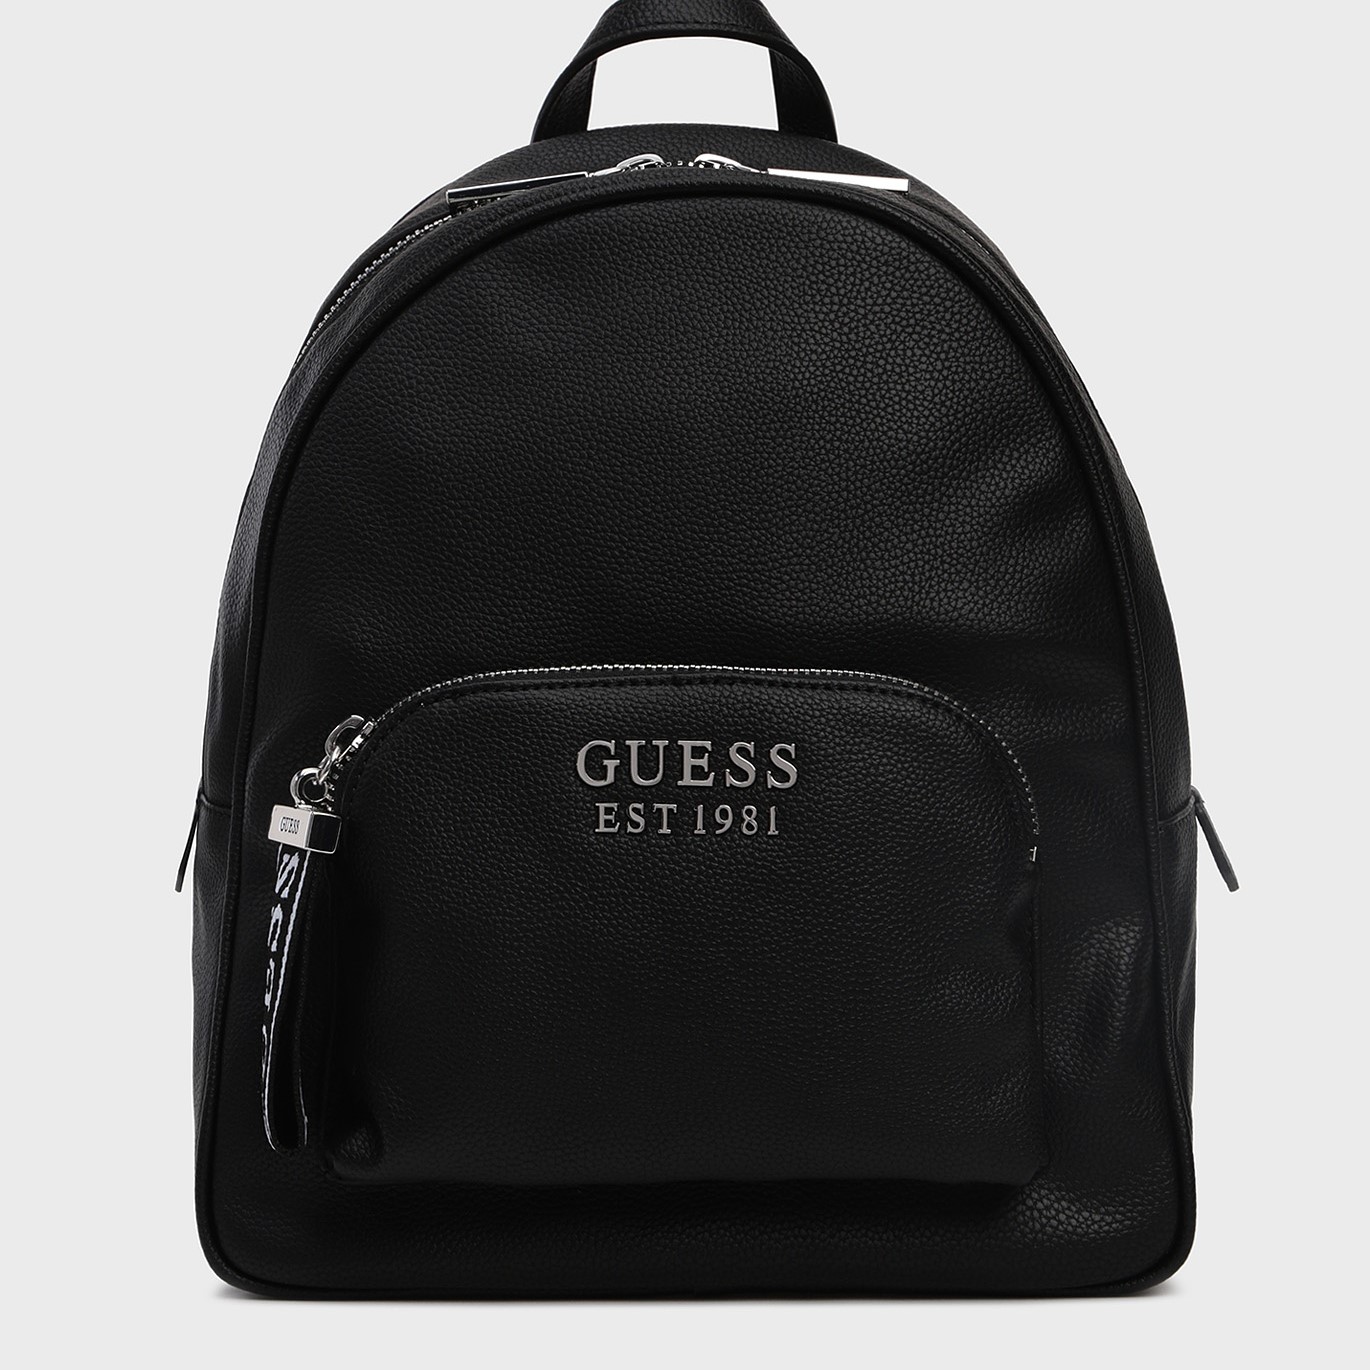 BALO NỮ GUESS BACKPACK 1 